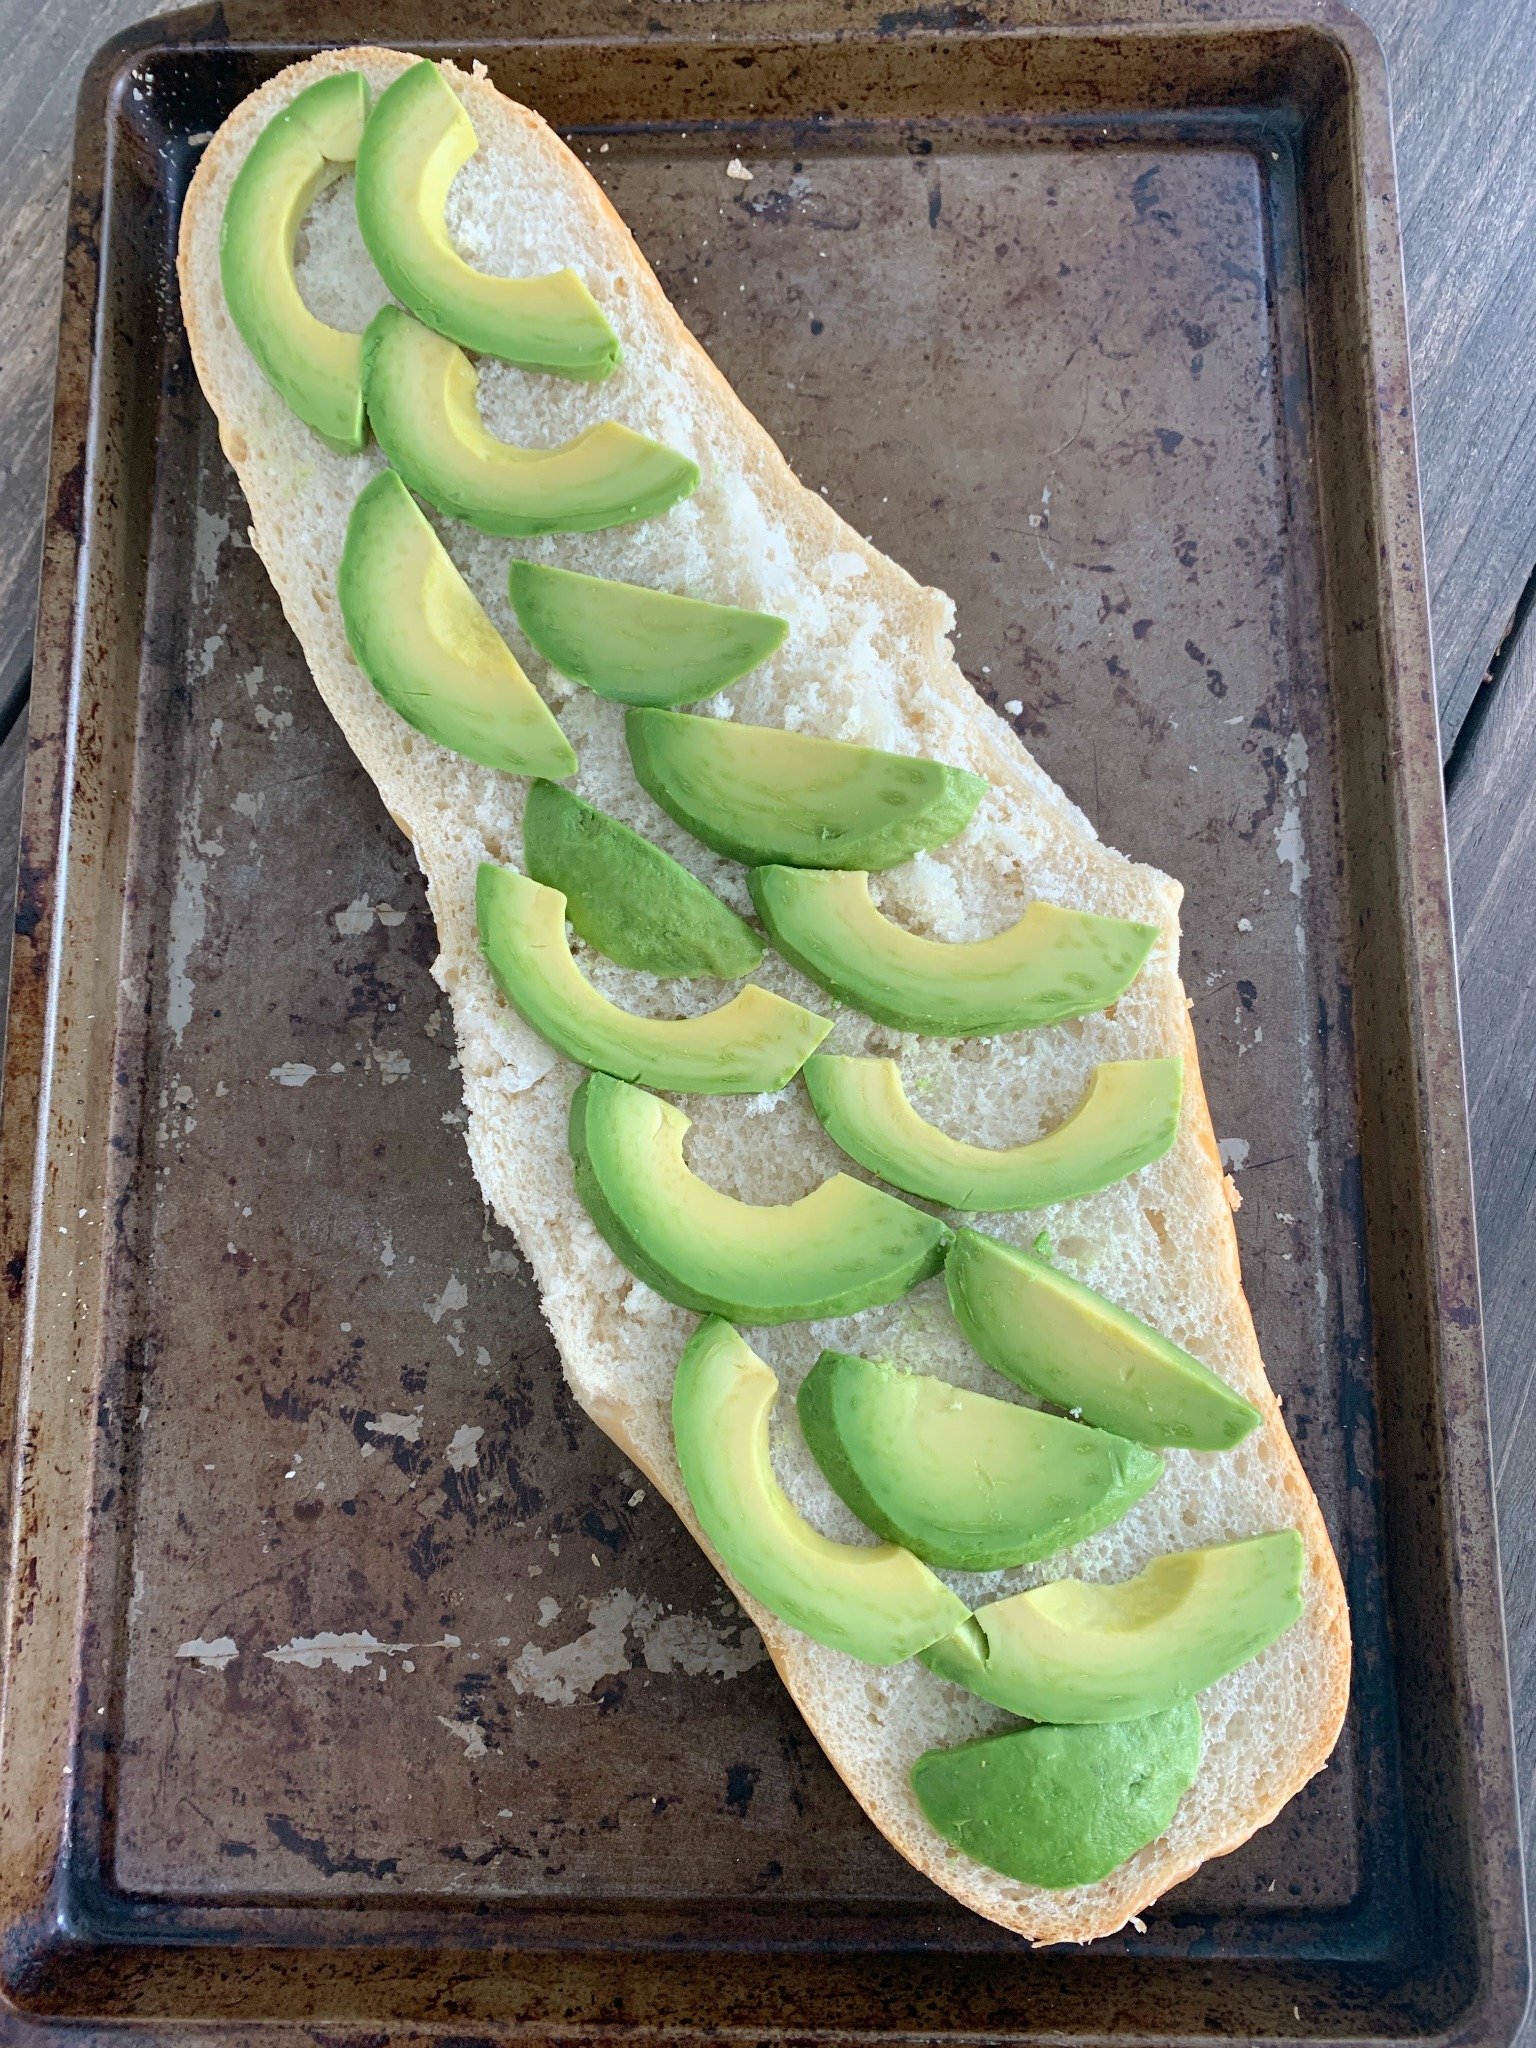 half a loaf of french bread with avocado slices